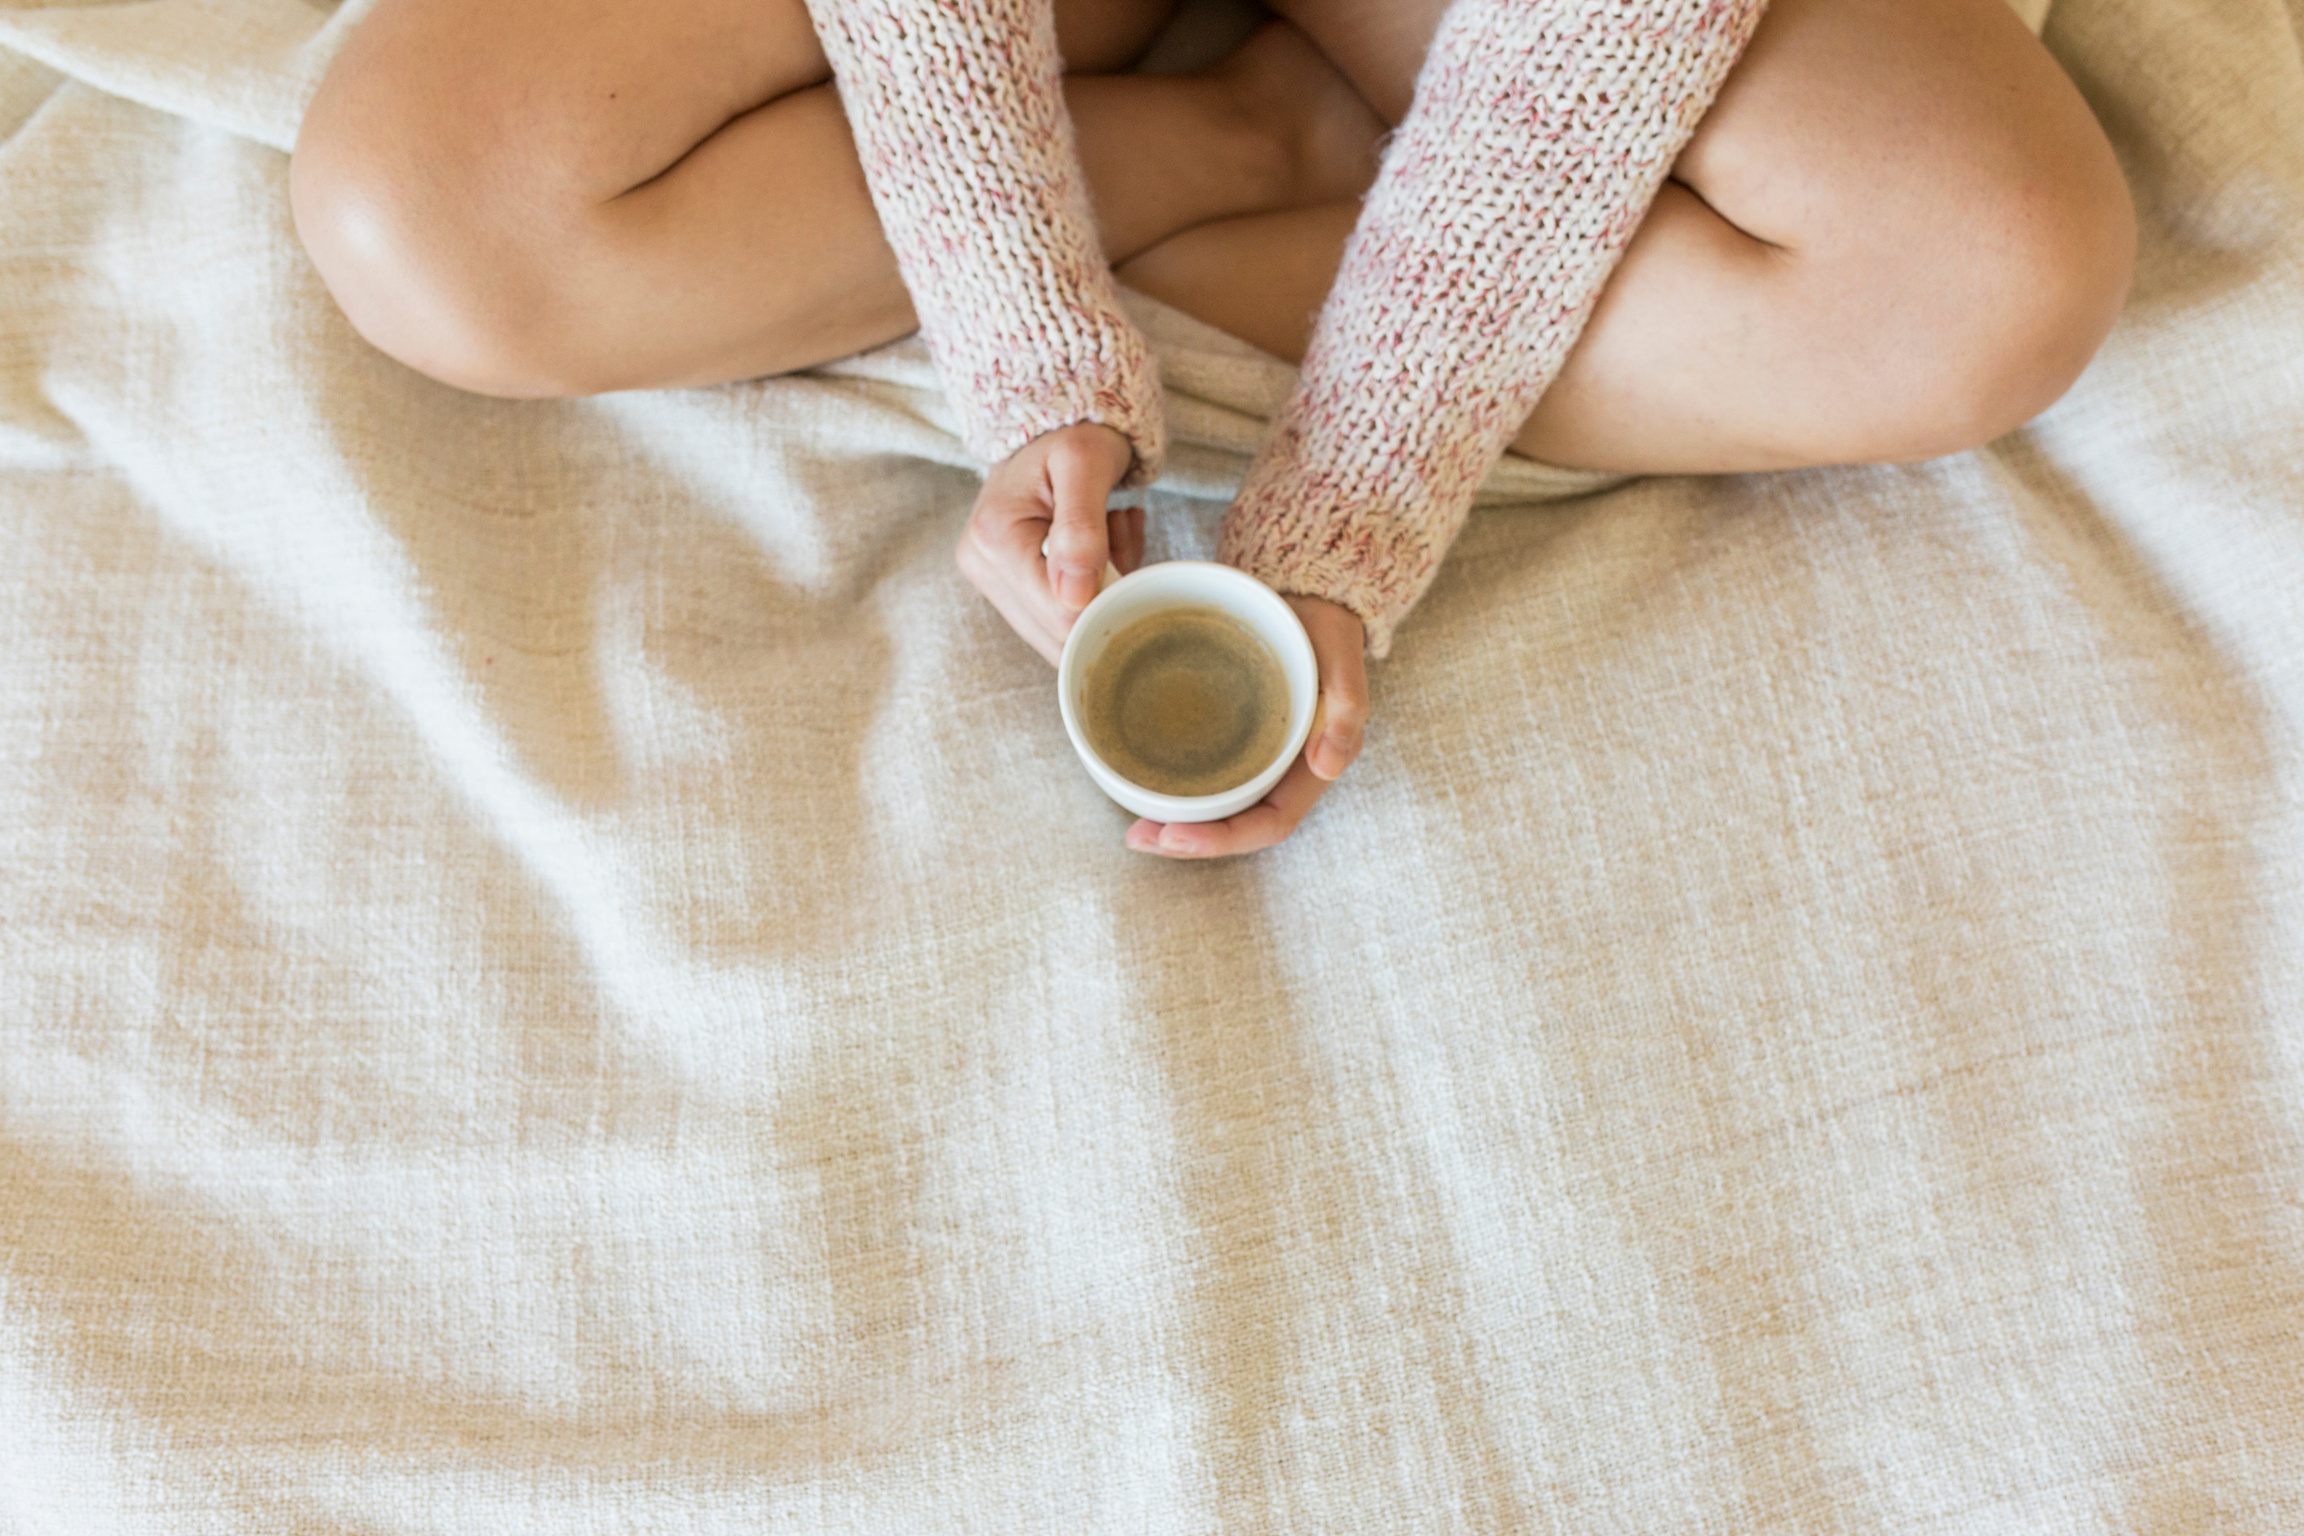 Woman Enjoying Coffee While Sitting in Bed